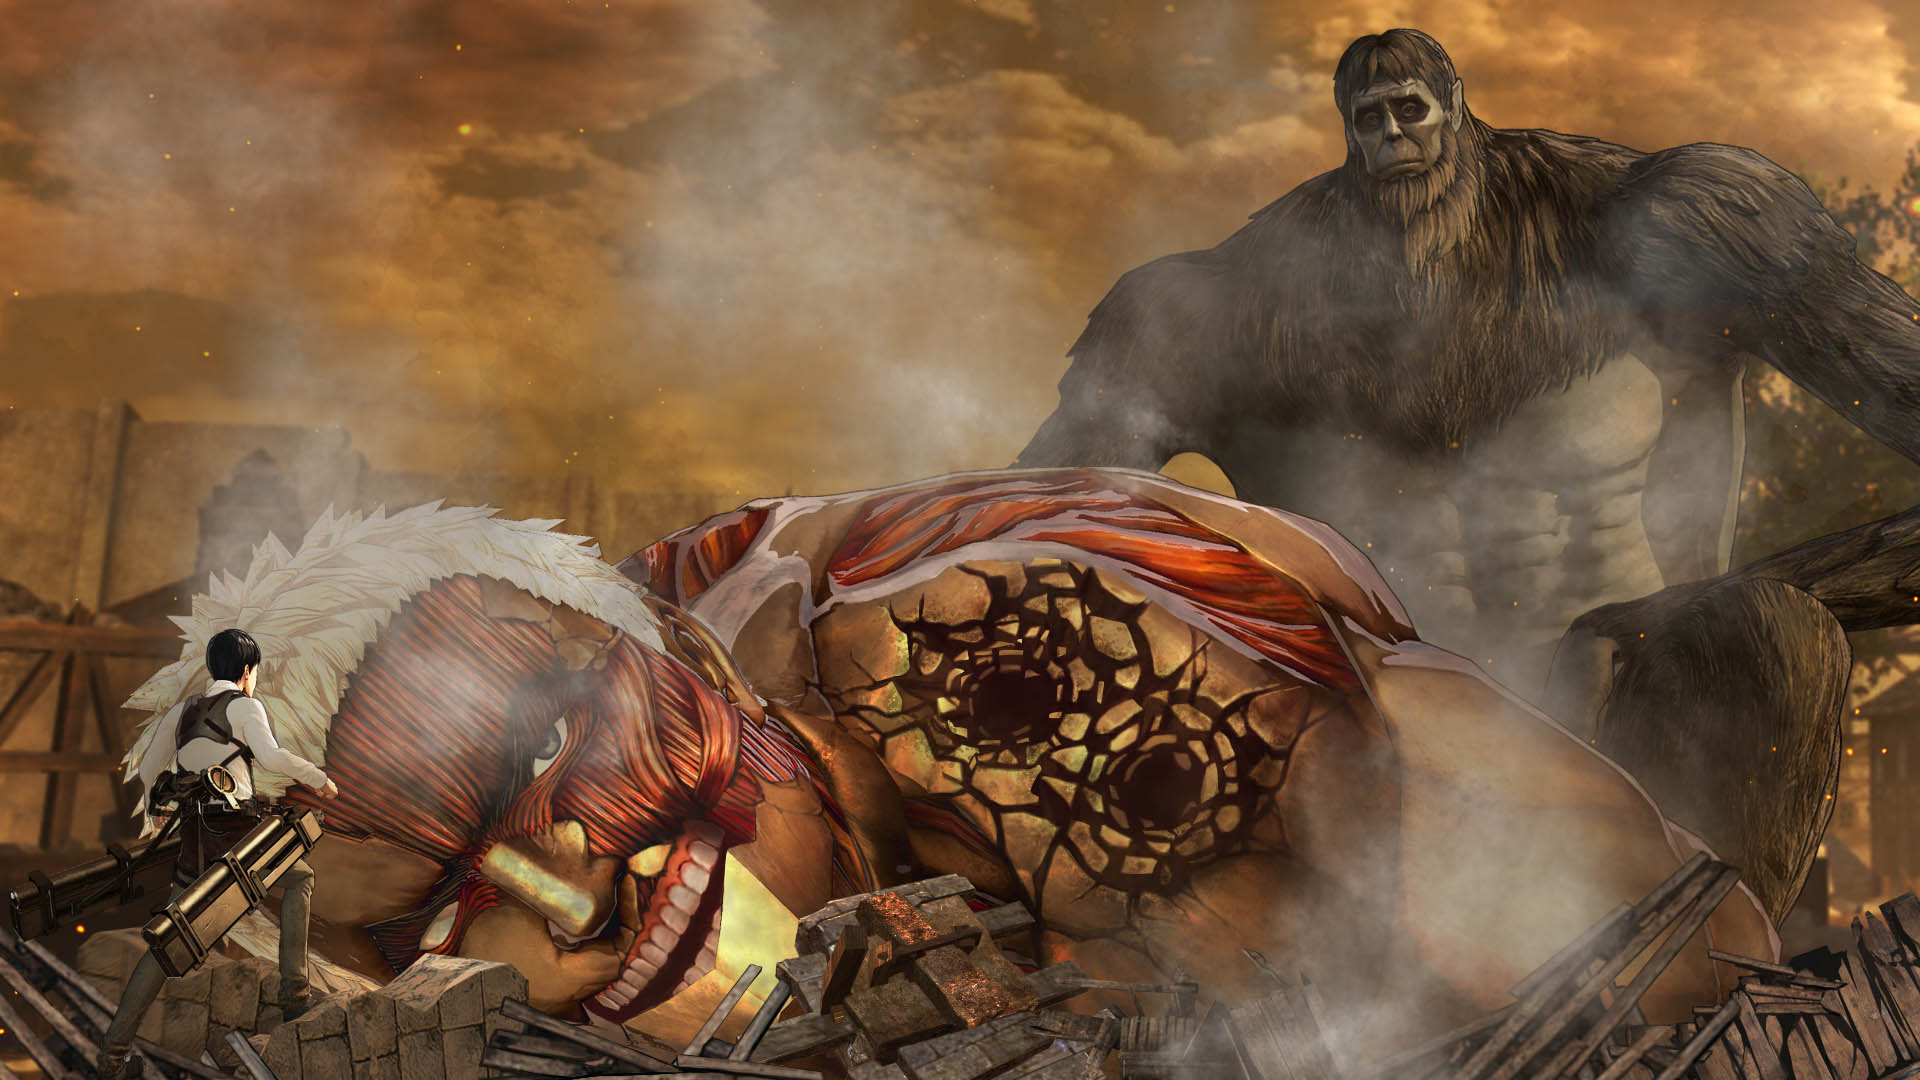 Attack On Titan 2 Final Battle Upgrade Pack A O T 2 Final Battle Upgrade Pack É²æã®å·¨äººï¼ Final Battle Ã¢ããã°ã¬ã¼ãããã¯ On Steam Attack on titans has been making noise ever since it has been released. attack on titan 2 final battle upgrade pack a o t 2 final battle upgrade pack é²æã®å·¨äººï¼ final battle ã¢ããã°ã¬ã¼ãããã¯